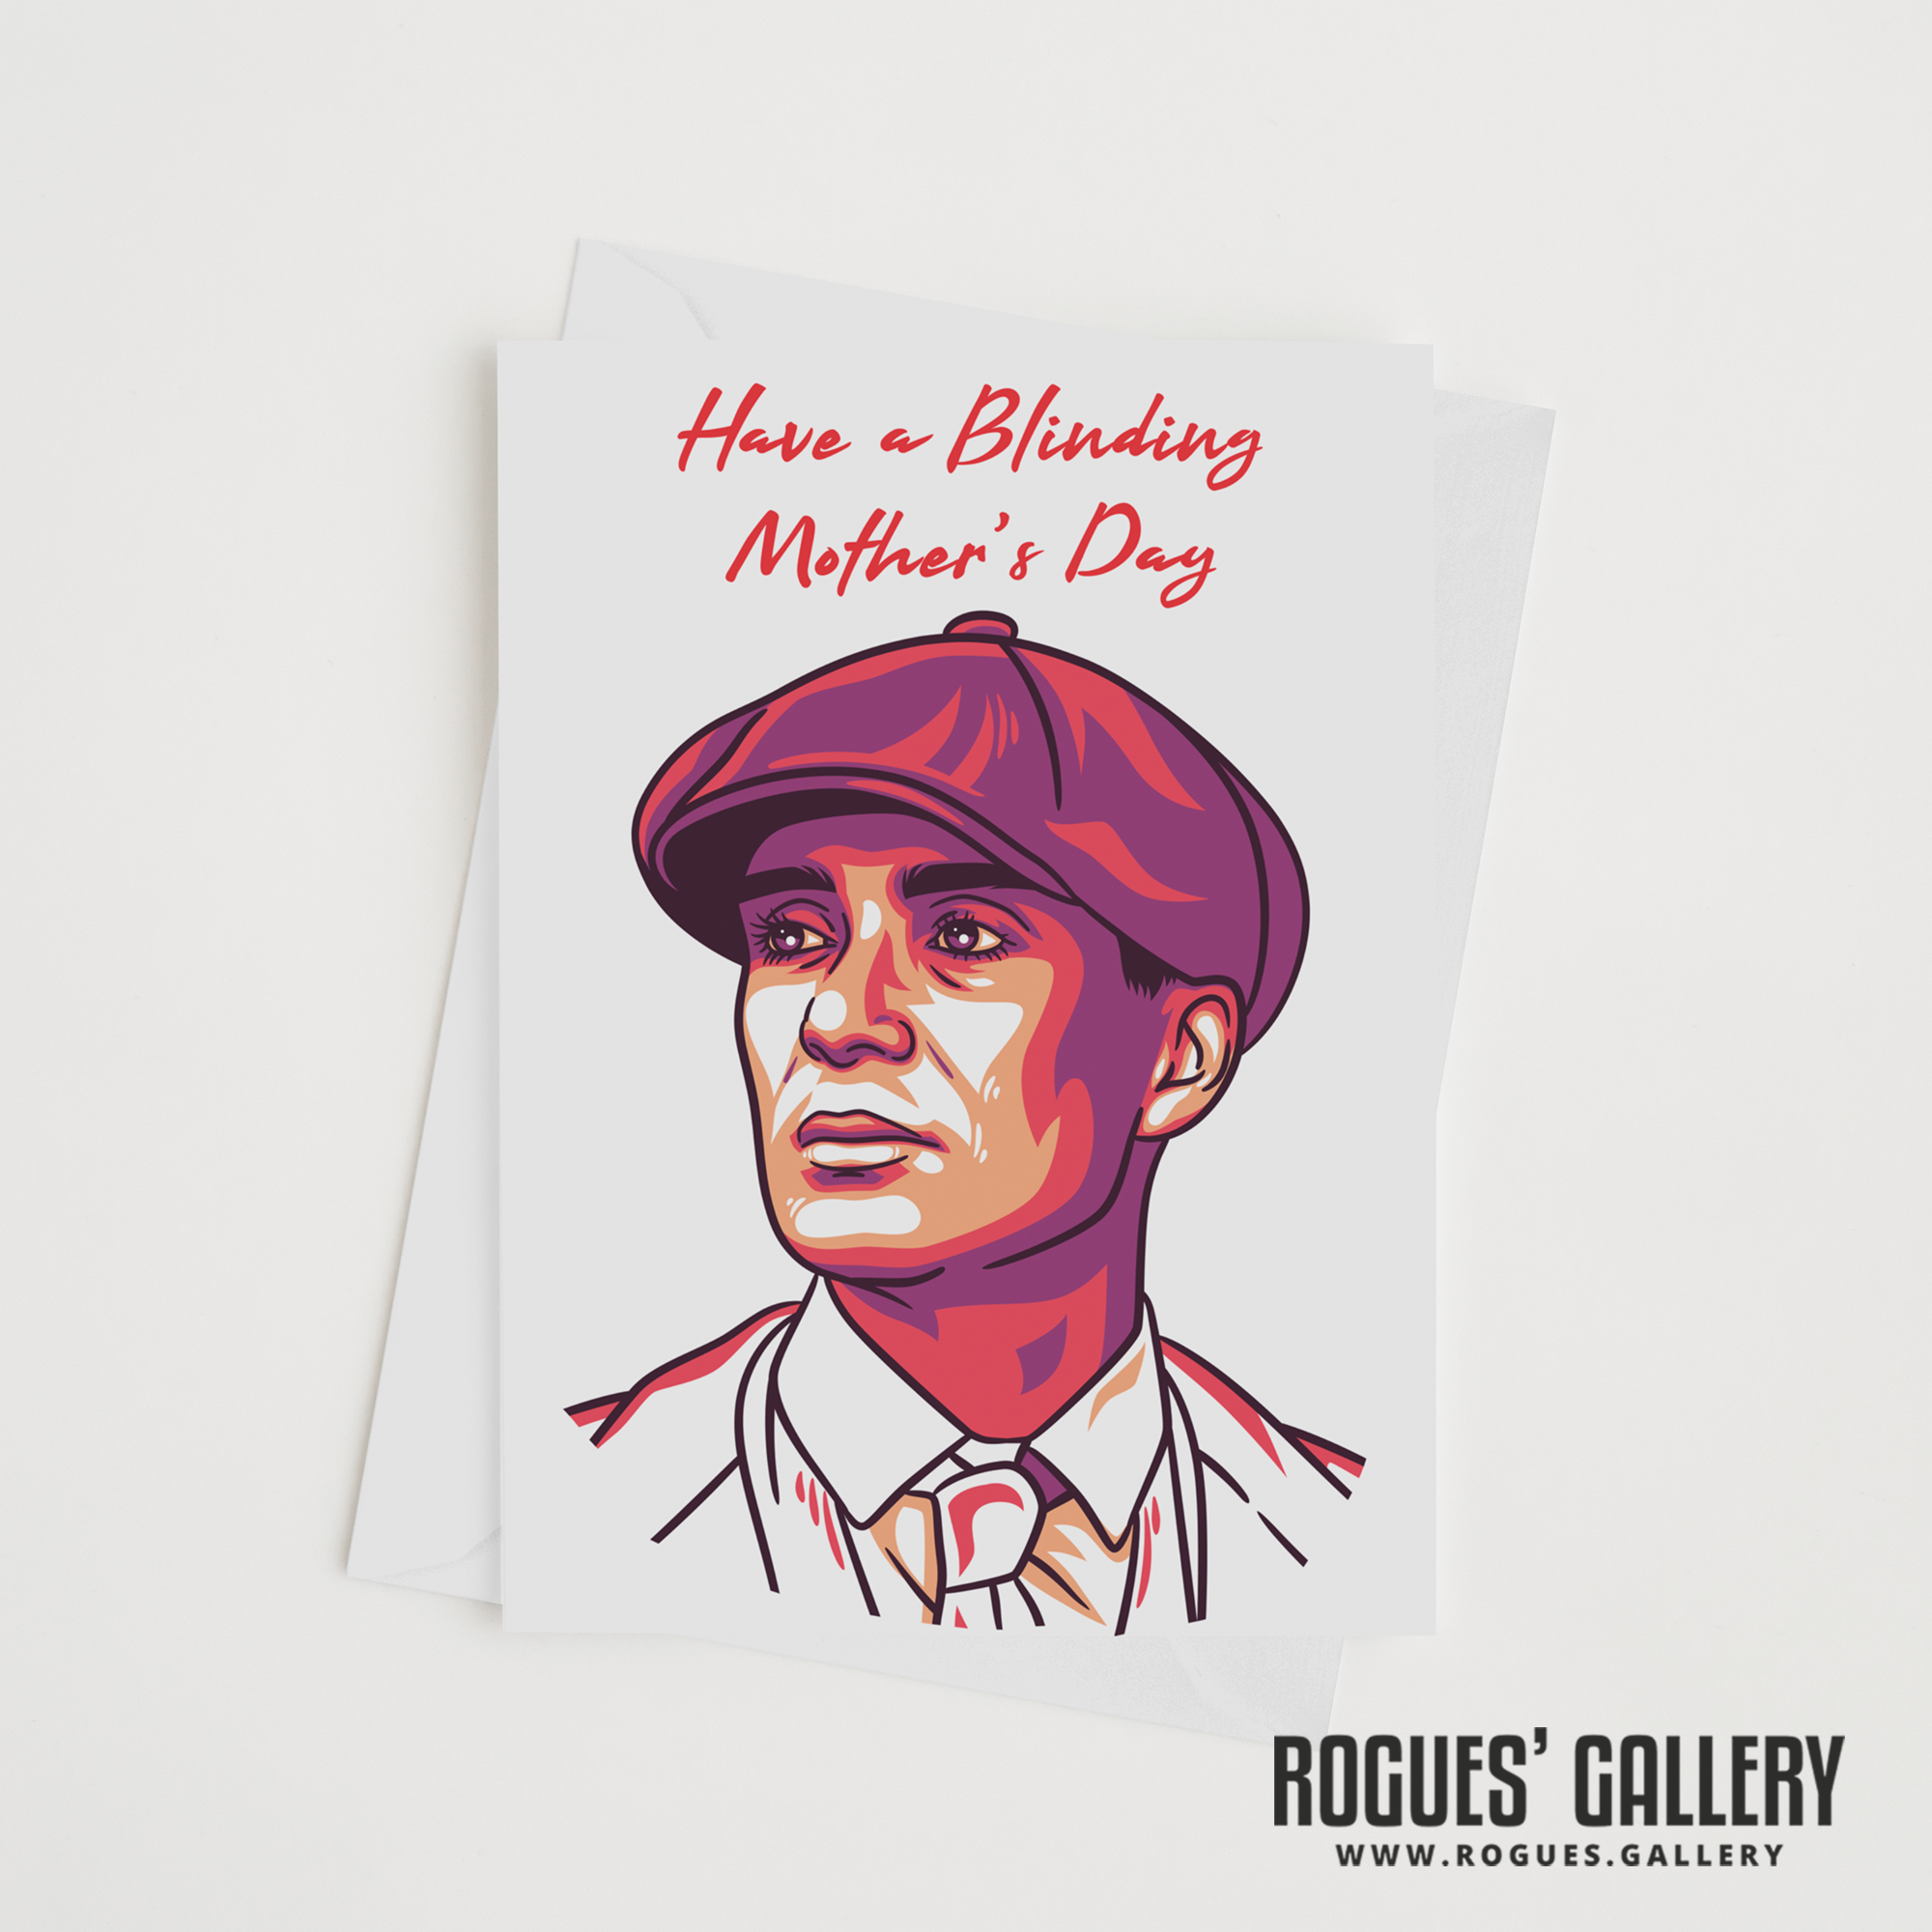 Peaky Blinders Thomas Shelby Mother's Day card BBC TV Birmingham Gangster period drama